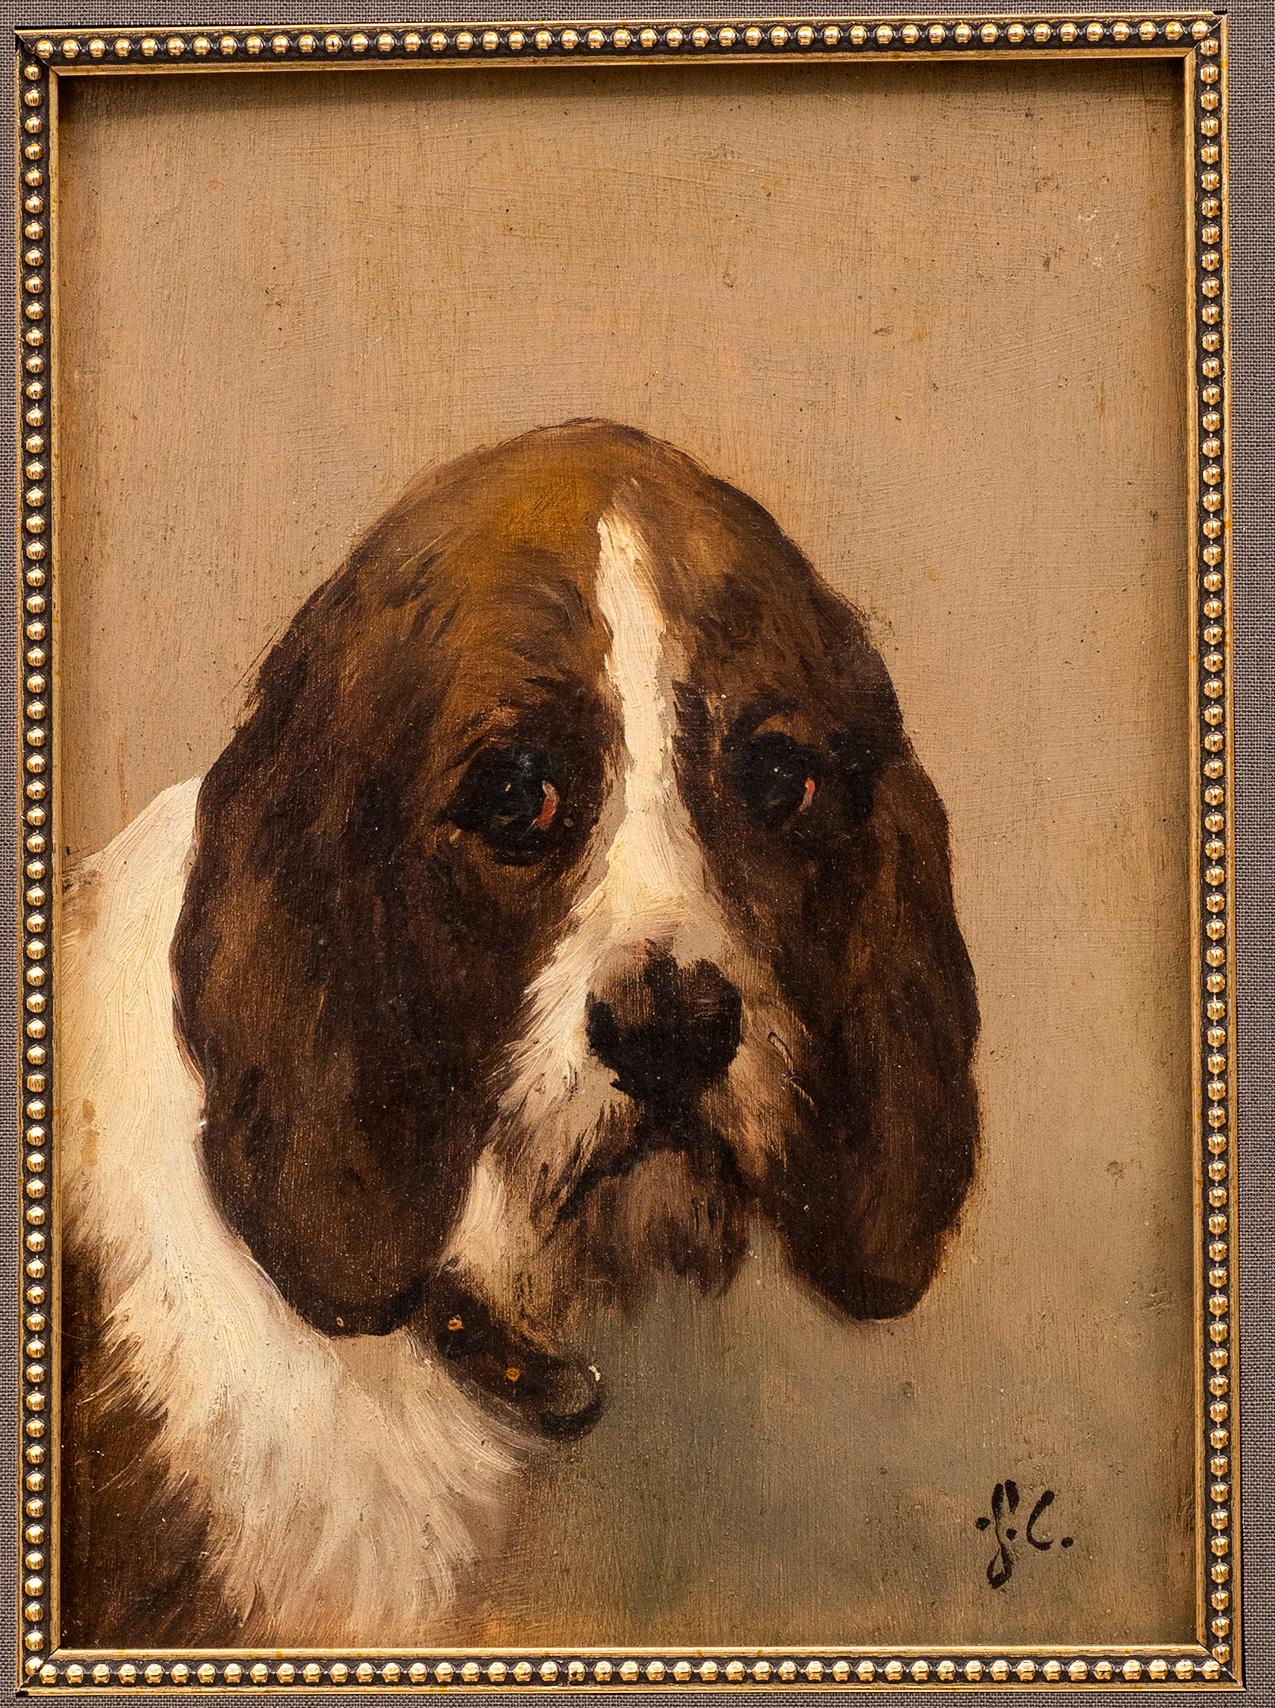 Antique Painting of a Hunting Dog
Jules Chardigny (1849-1892)
Circa 1870
Oil on paper.
8 x 6 (18 1/2 x 15 1/4 frame) inches

The dog, possibly a Grand Griffon Vendéen, is depicted with a rather mirthful expression. Similarly desirable examples date